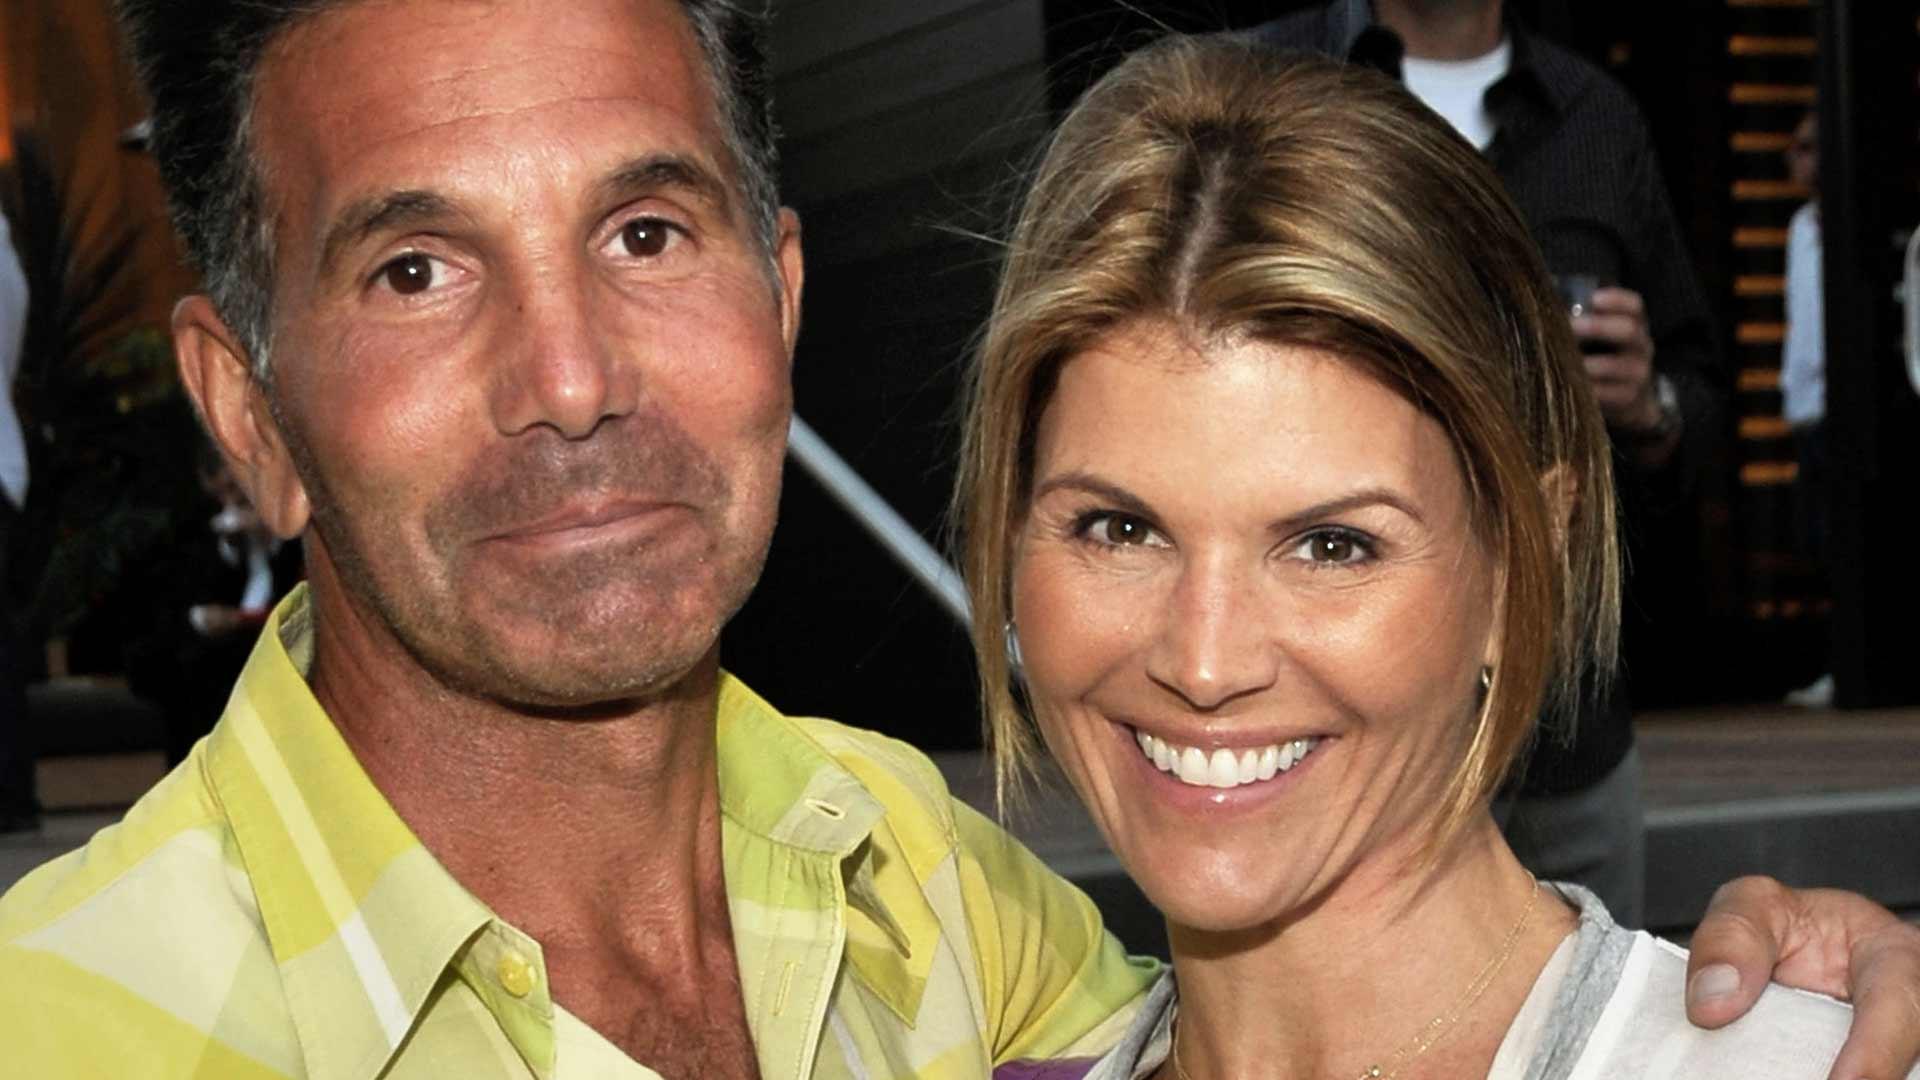 Lori Loughlin Bail Set at $1 Million While She Remains Calm During Court Appearance